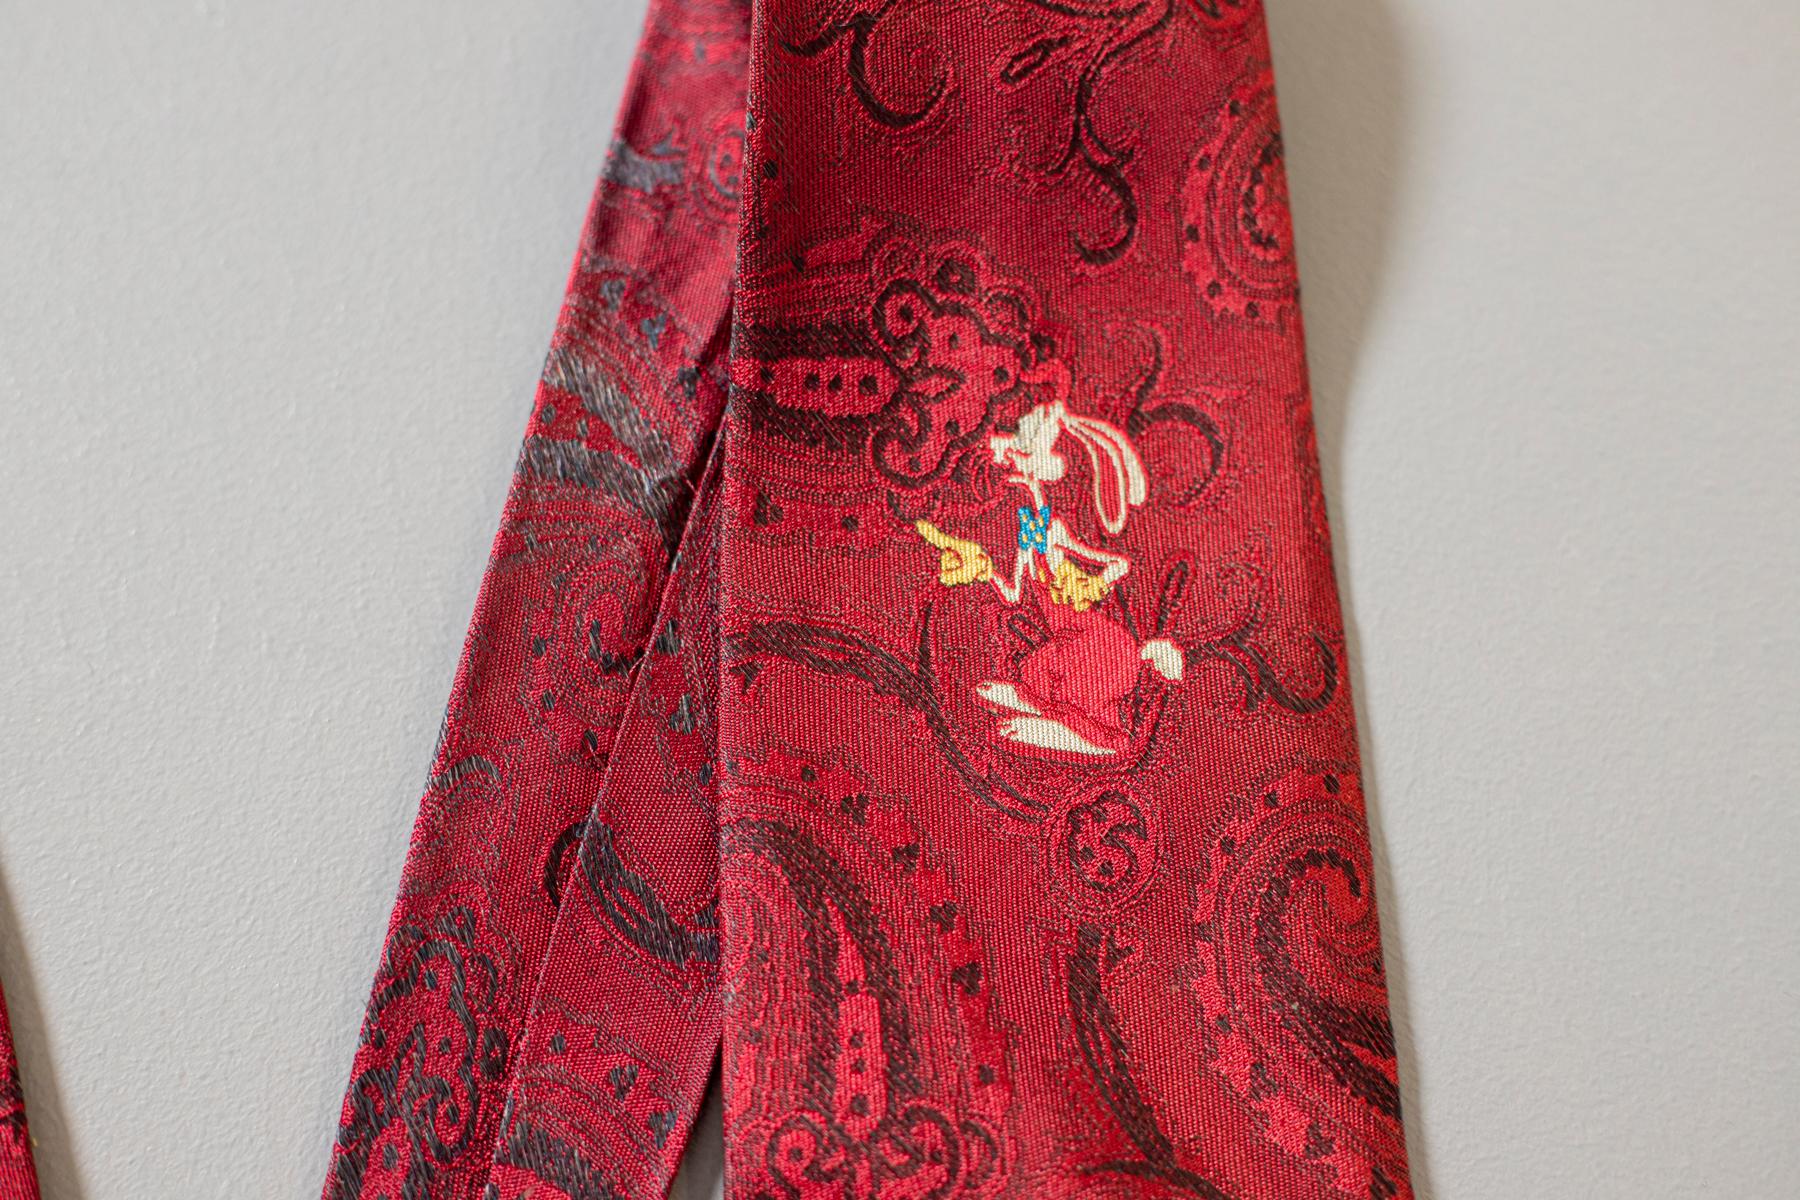 Particular tie designed by Chi ha incastrato Roger Rabbit, perfect for lovers of this famous rabbit. Decorated with a red background with paisley motifs and with Roger rabbit drawn in the center. Ideal for an evening with friends at the cinema or